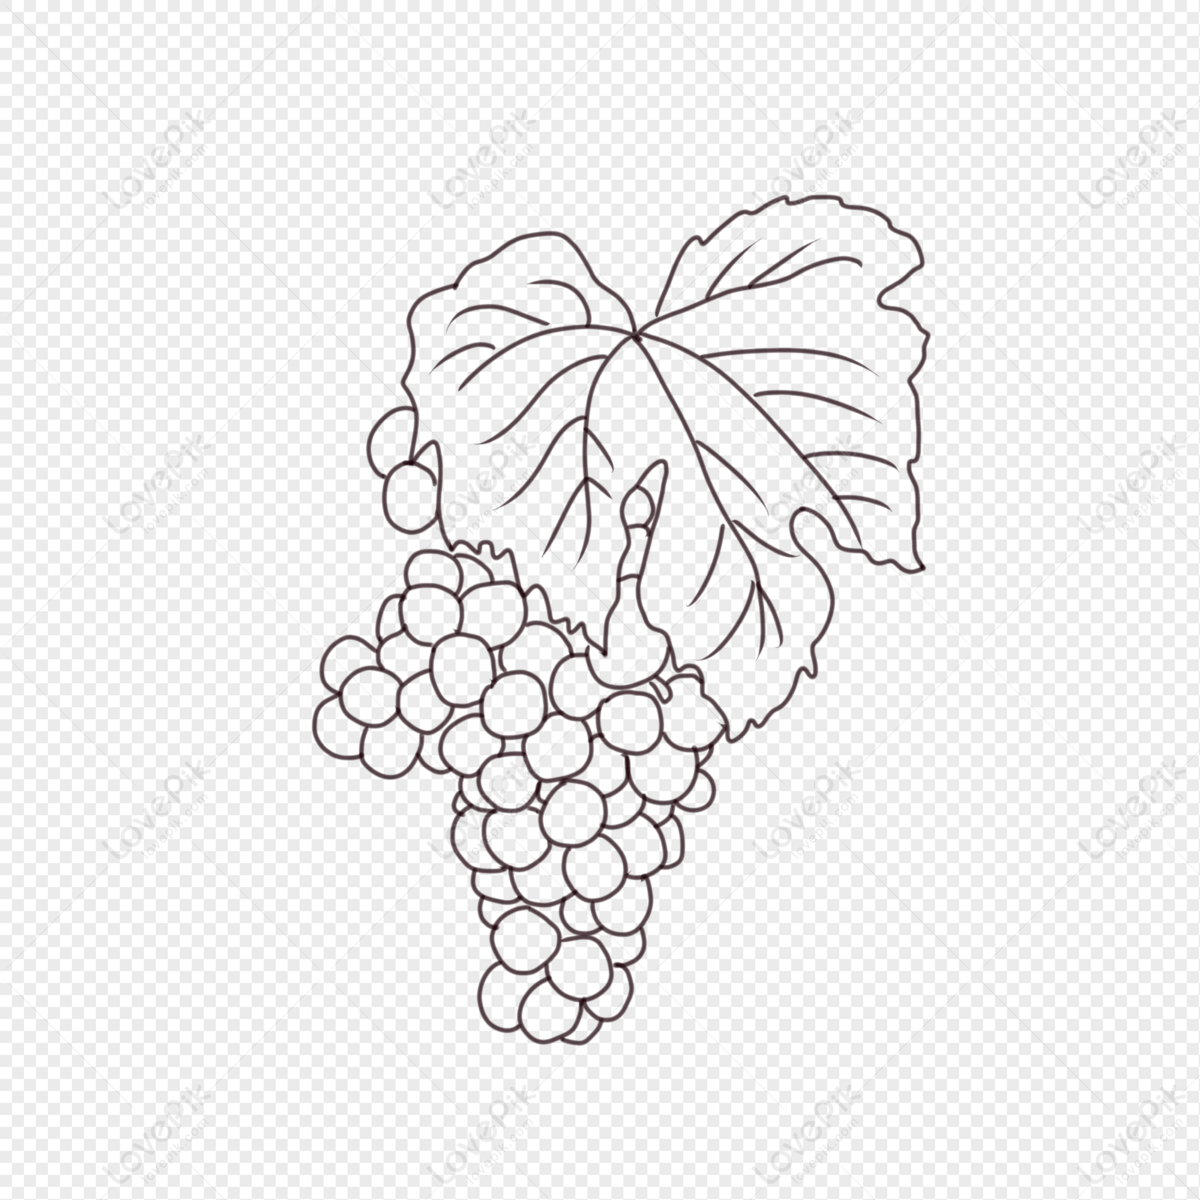 Bunch of grapes with leaves color sketch engraving vector illustration.  Scratch board style imitation. Hand drawn image. Stock Vector by  ©AlexanderPokusay 248141182